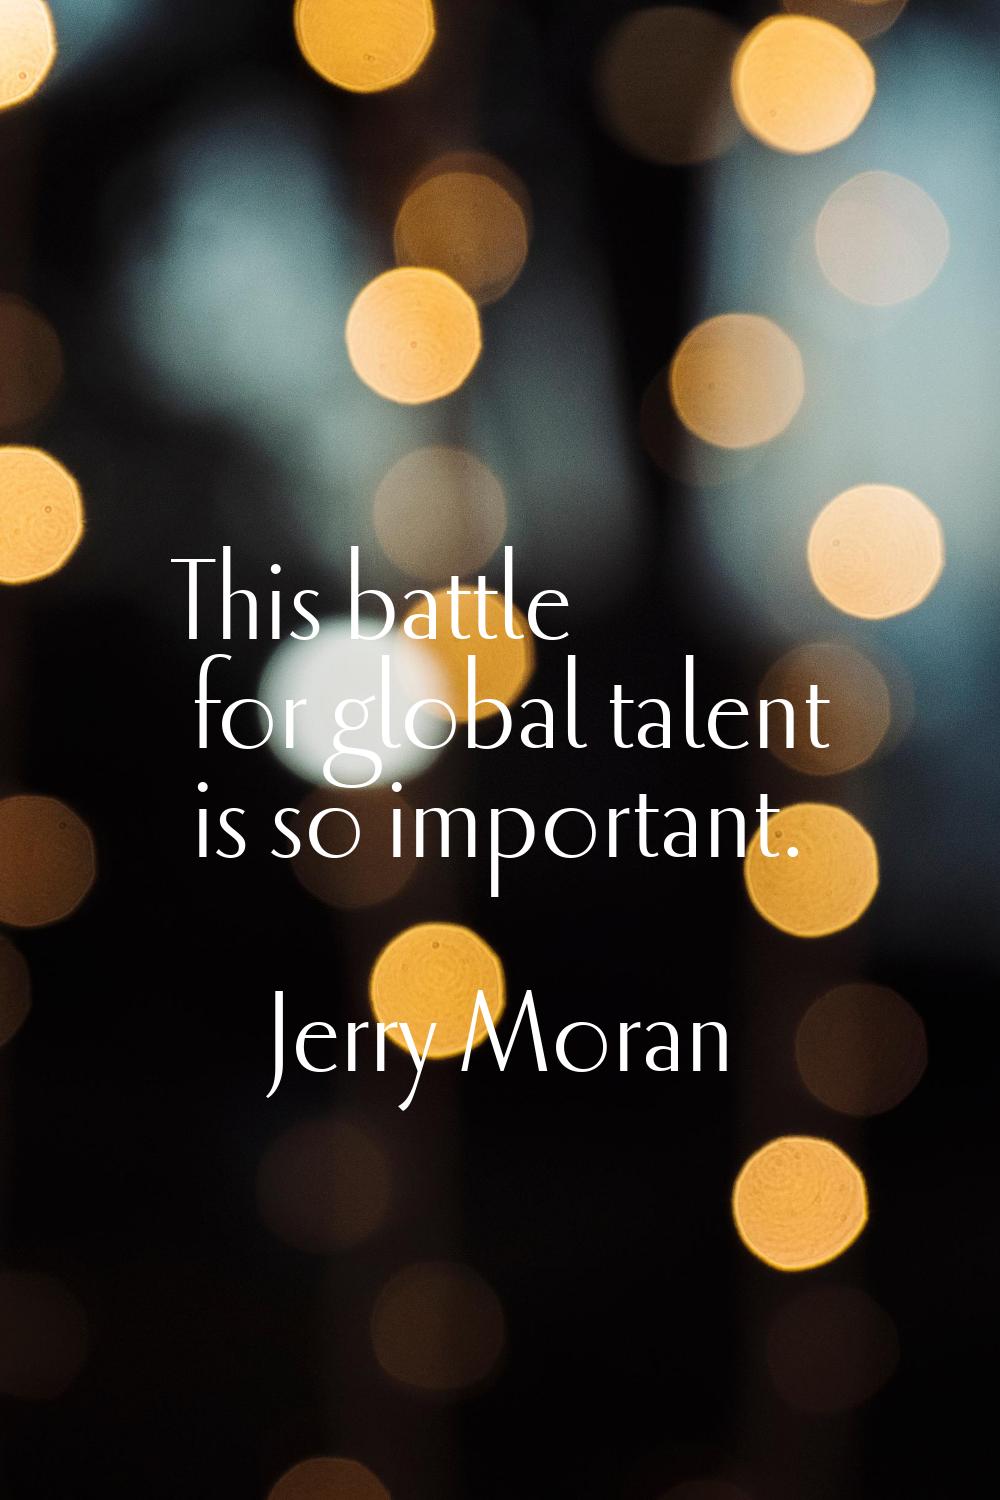 This battle for global talent is so important.